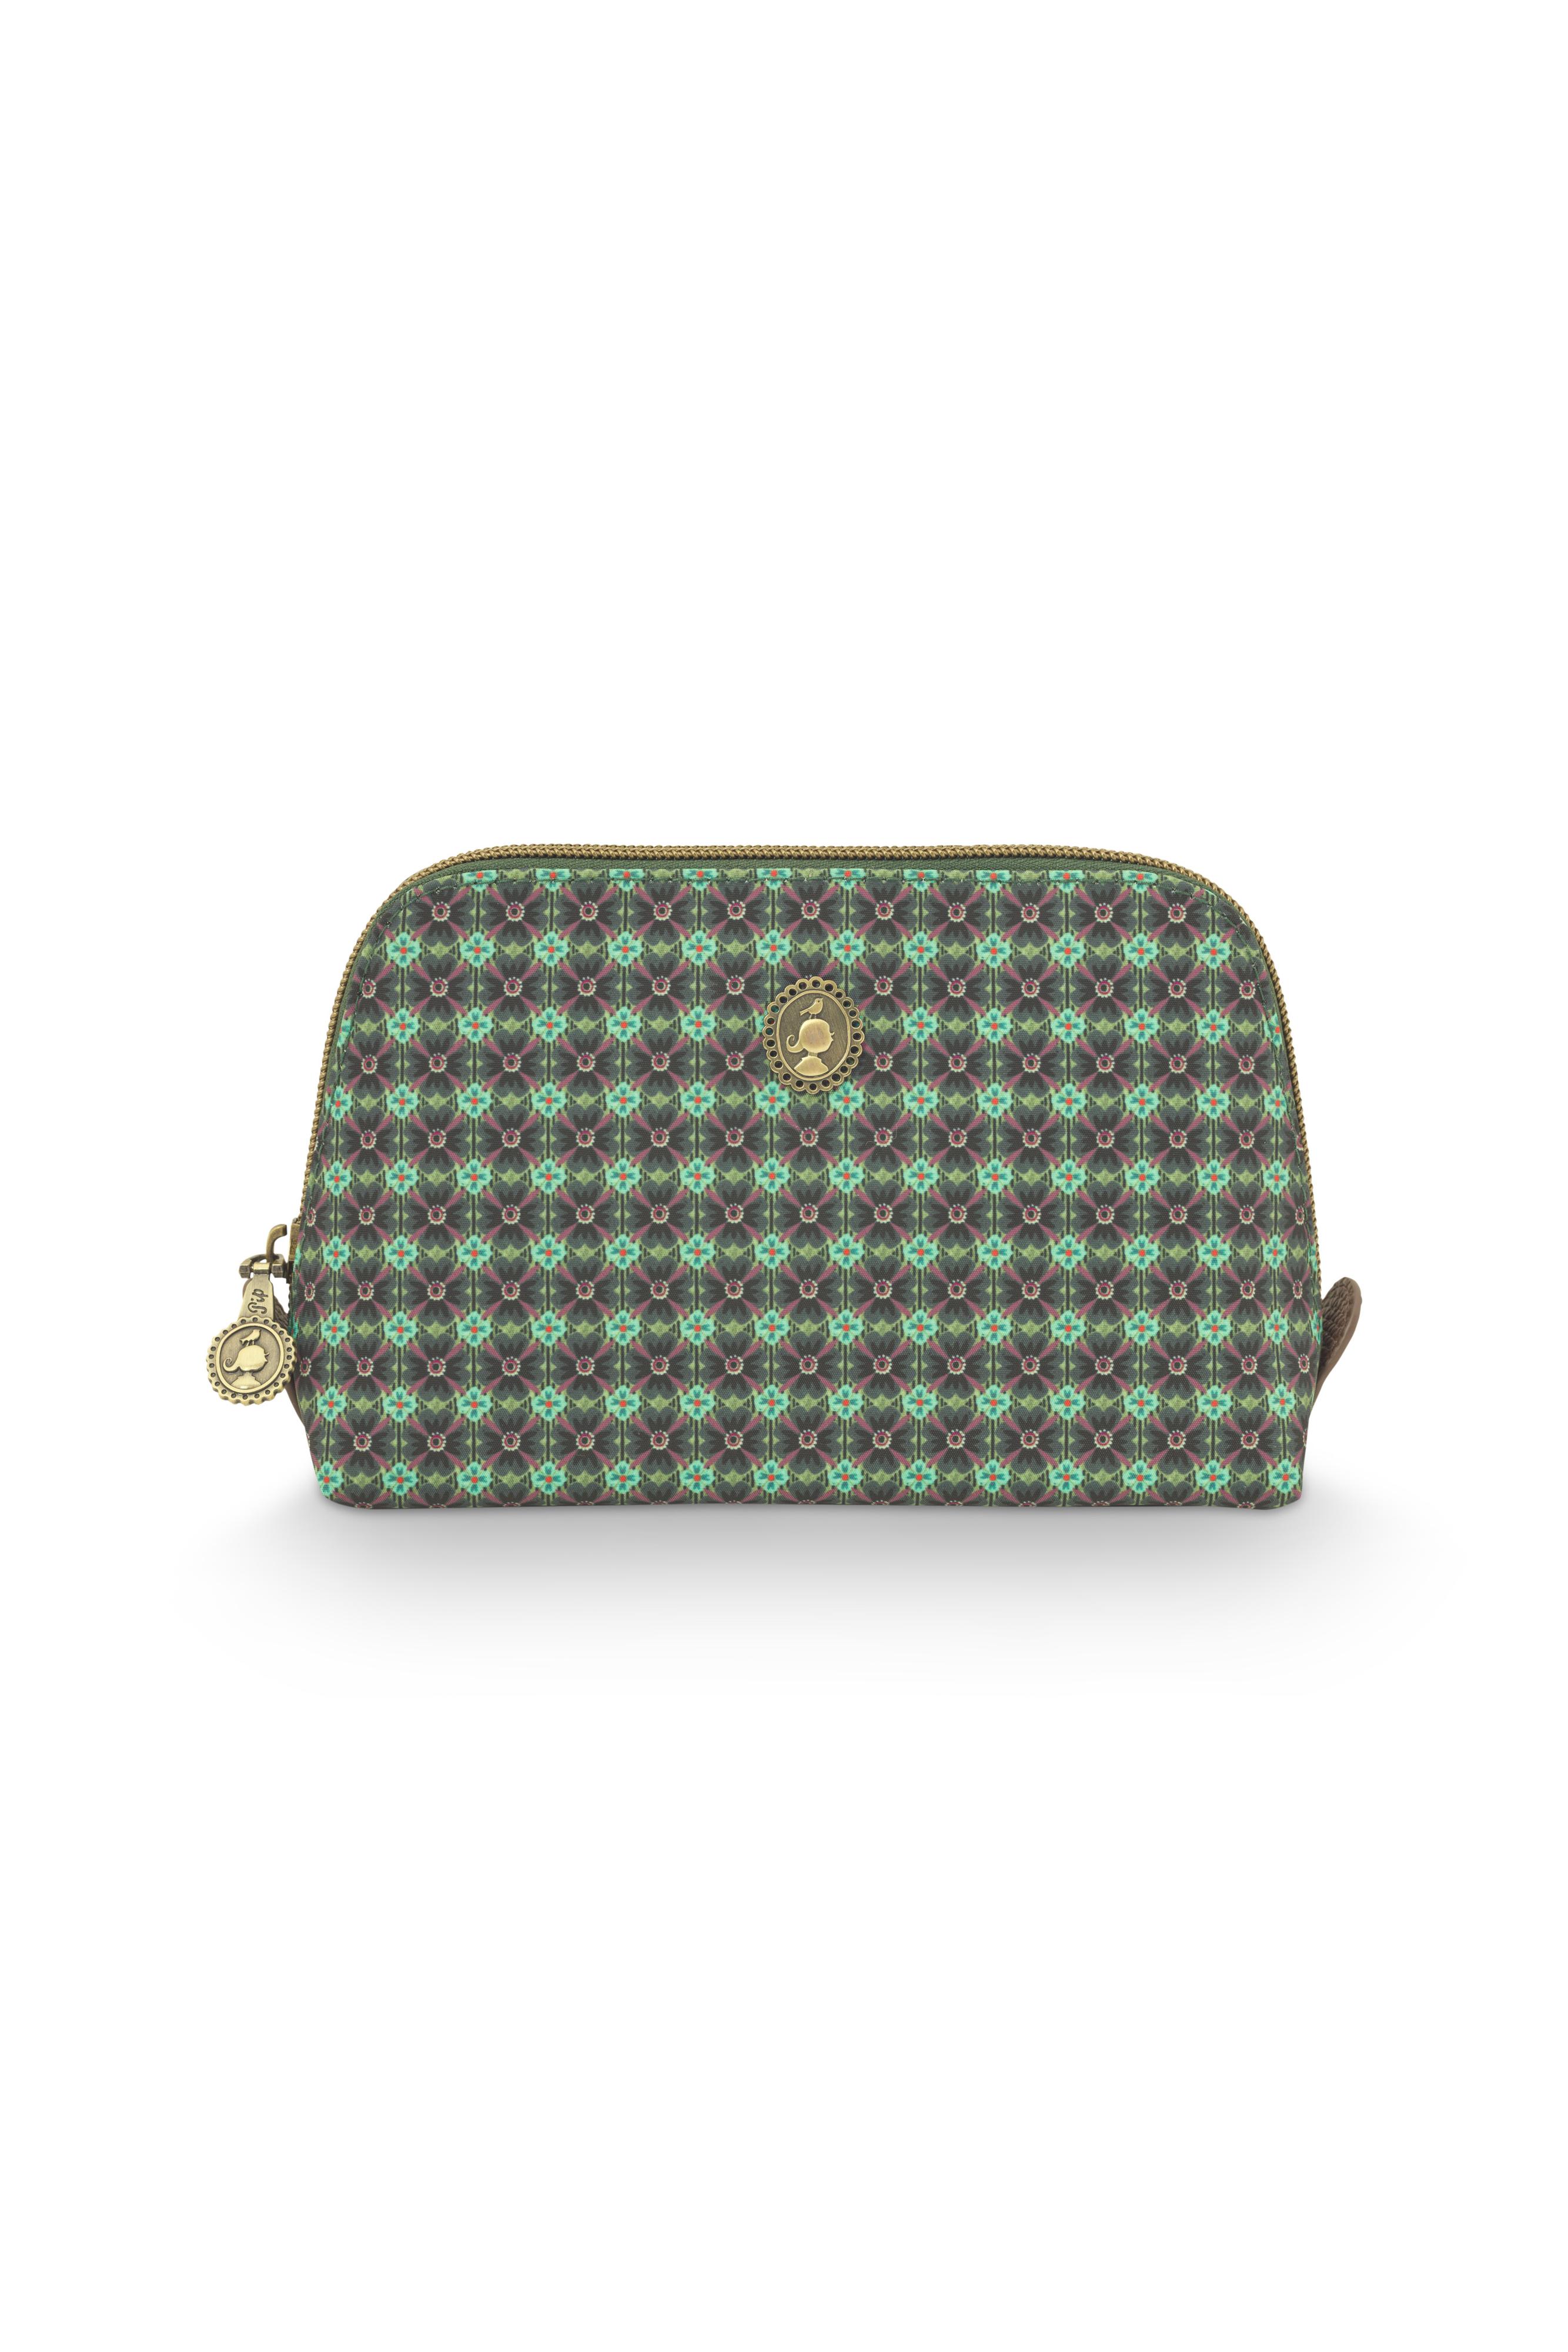 Coby Cosmetic Bag Triangle Small Clover Green 19/15x12x6cm Gift